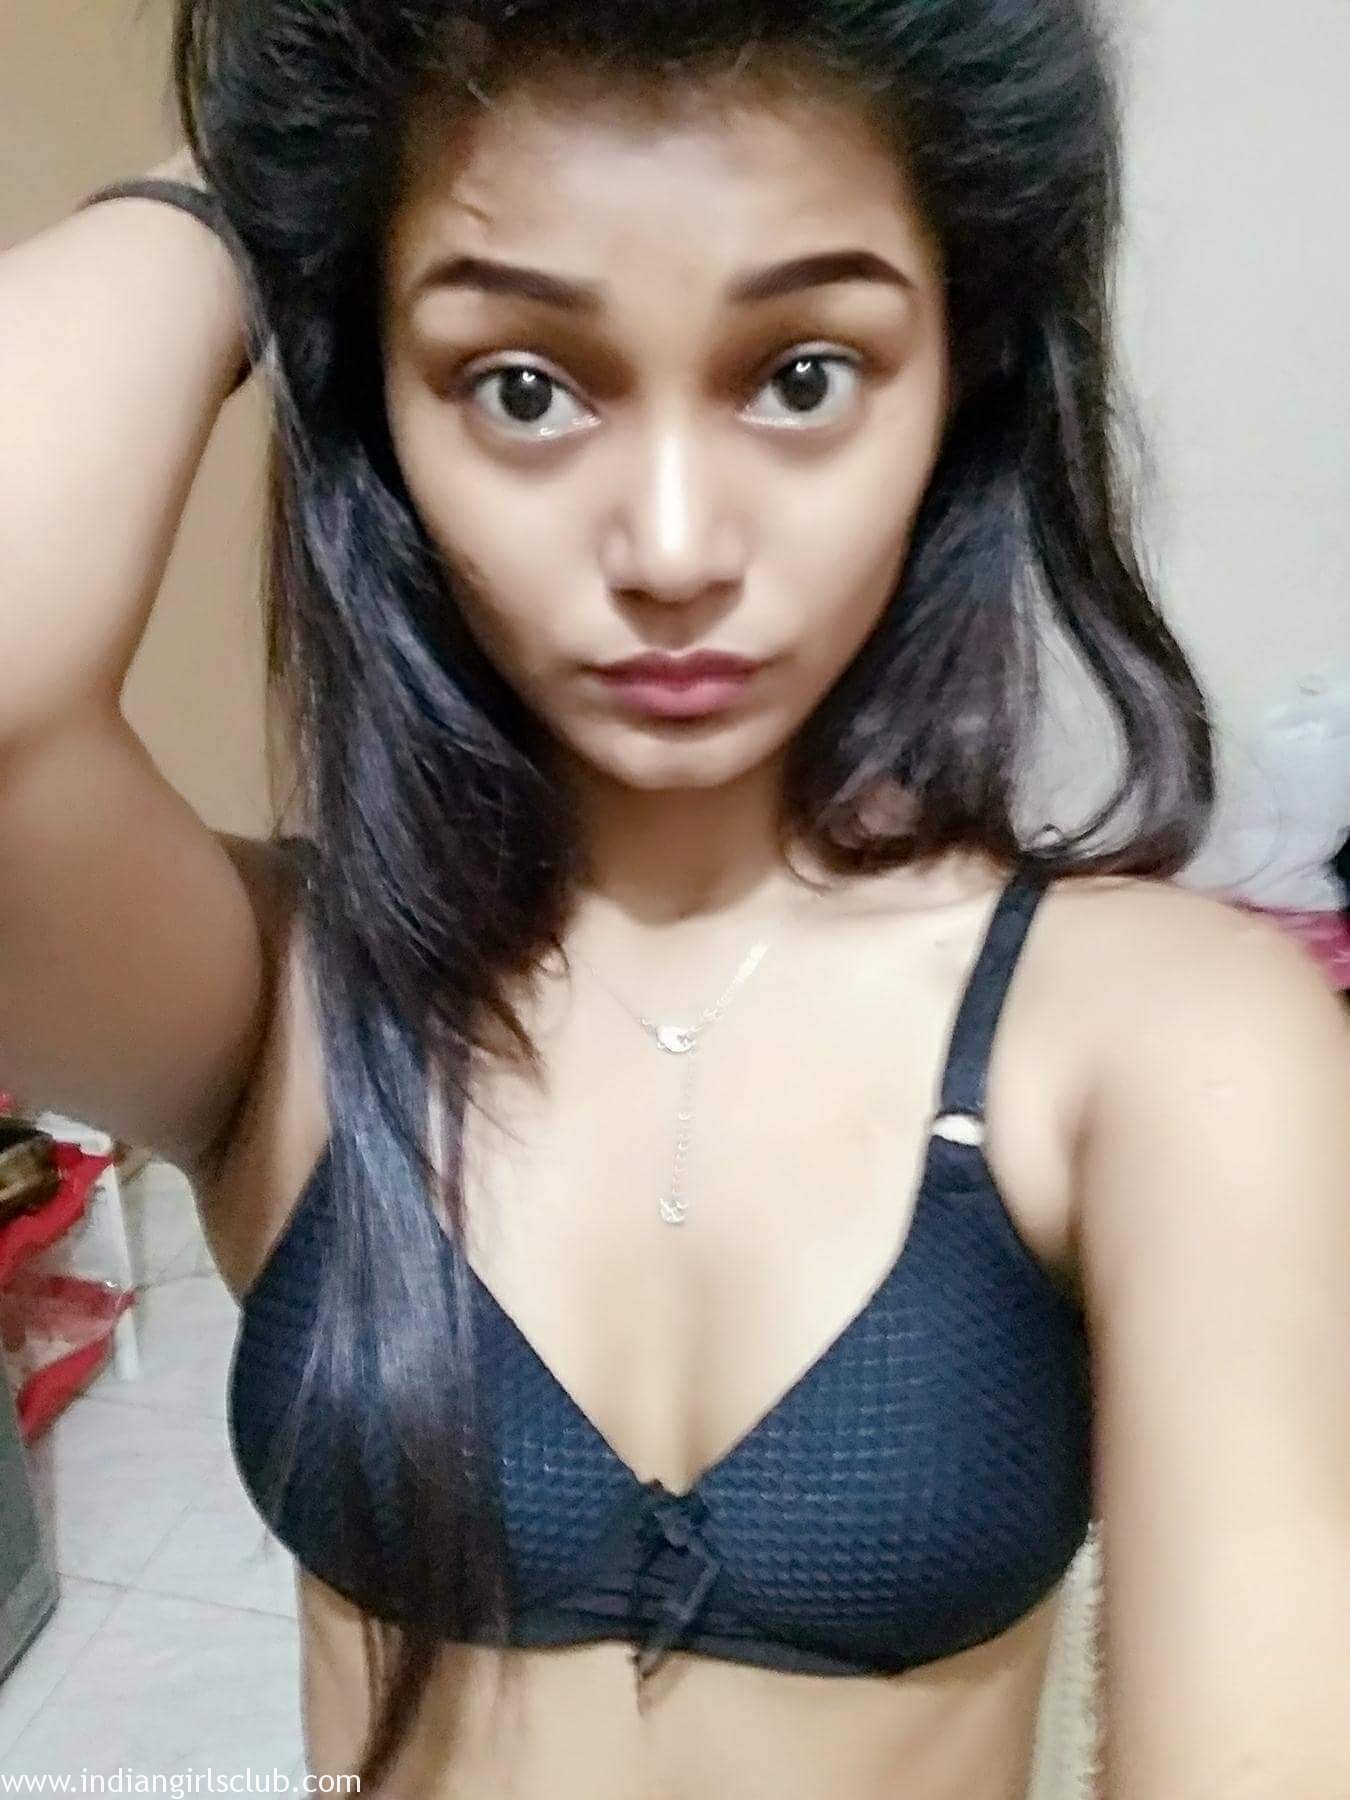 juicy_indian_teen_homemade_porn_19 - Indian Girls Club picture